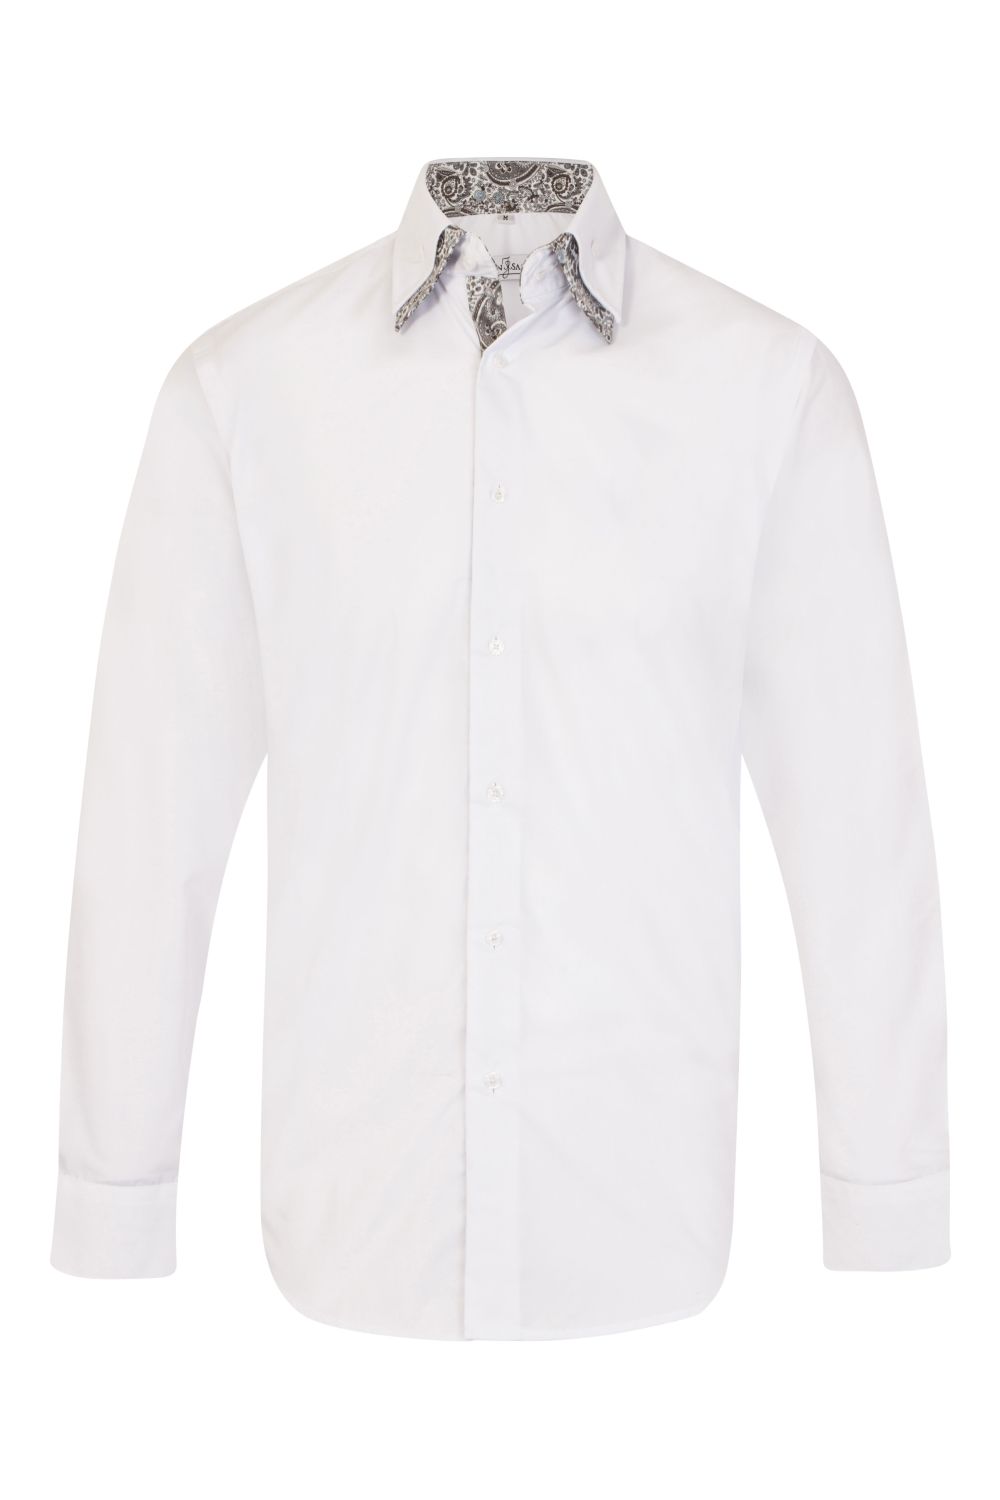 Plain White Regular Fit 100% Cotton Shirt with Paisley Double Collar